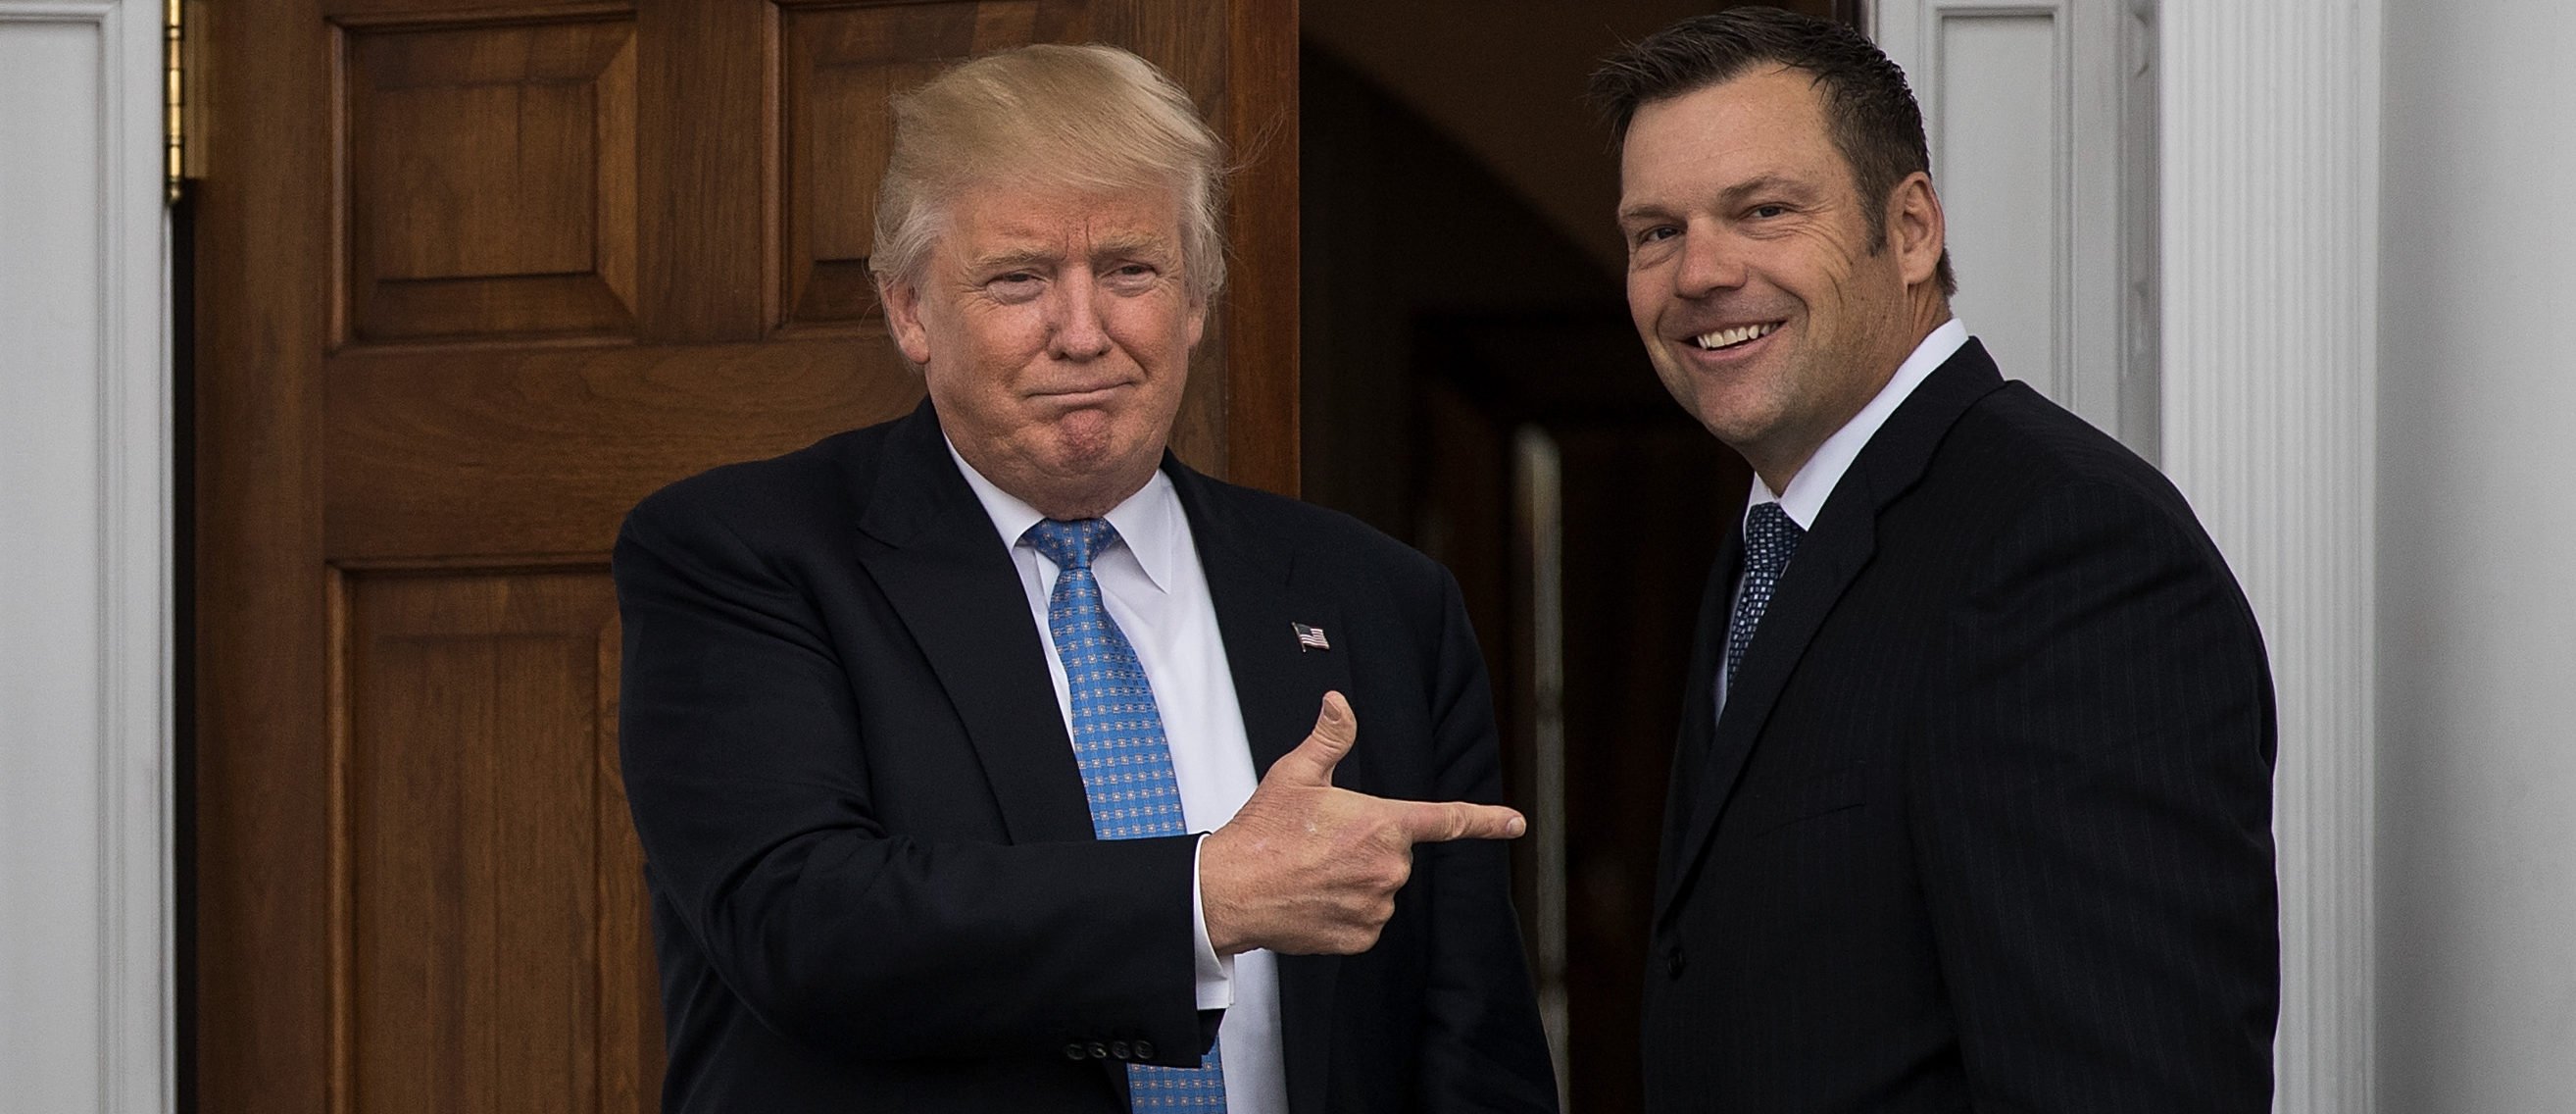 President-elect Donald Trump and Kris Kobach, Kansas secretary of state, pose for a photo following their meeting with president-elect at Trump International Golf Club, November 20, 2016 in Bedminster Township, New Jersey. Drew Angerer/Getty Images